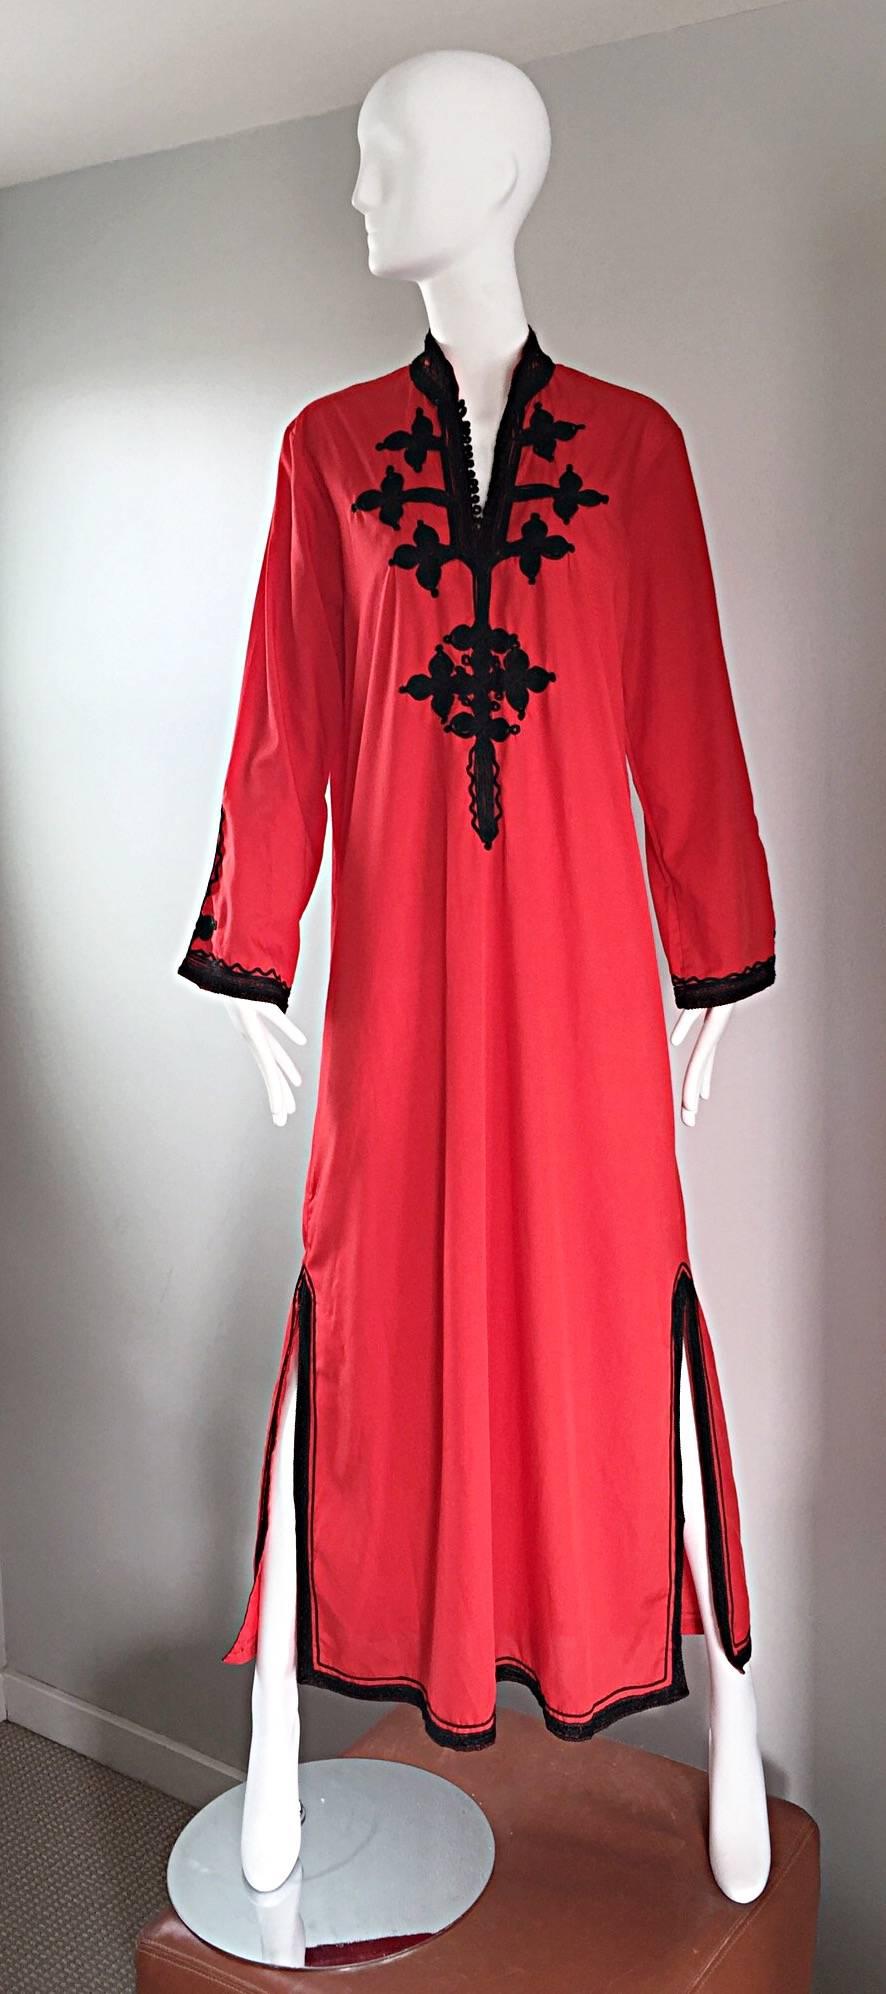 Vintage Neiman Marcus 1970s Red and Black Asian Inspired 70s Caftan Maxi Dress For Sale 2